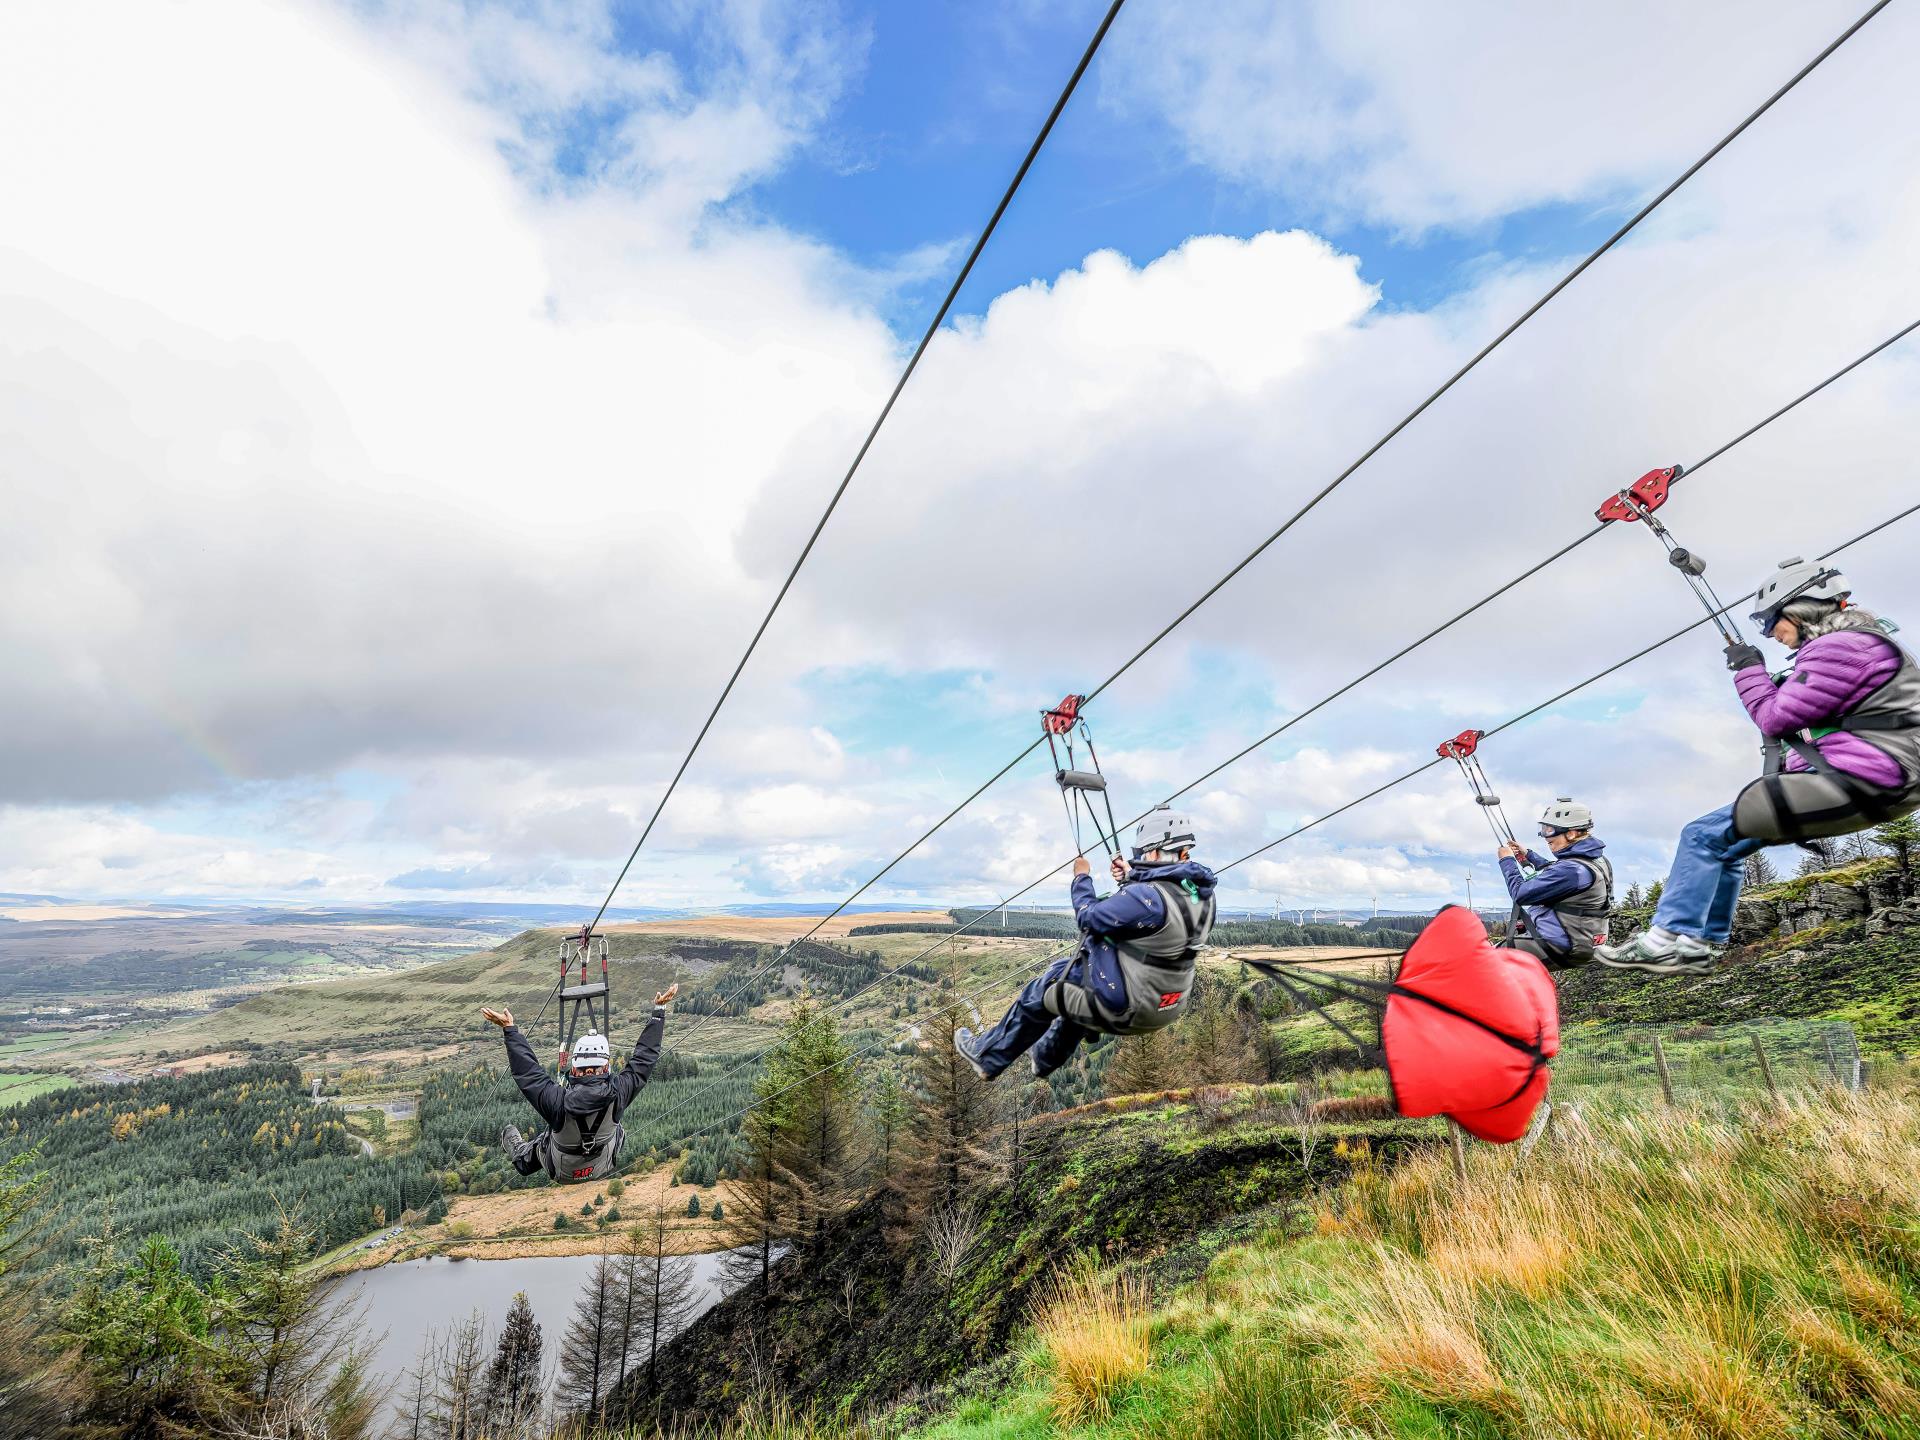 The fastest seated zip line in the world